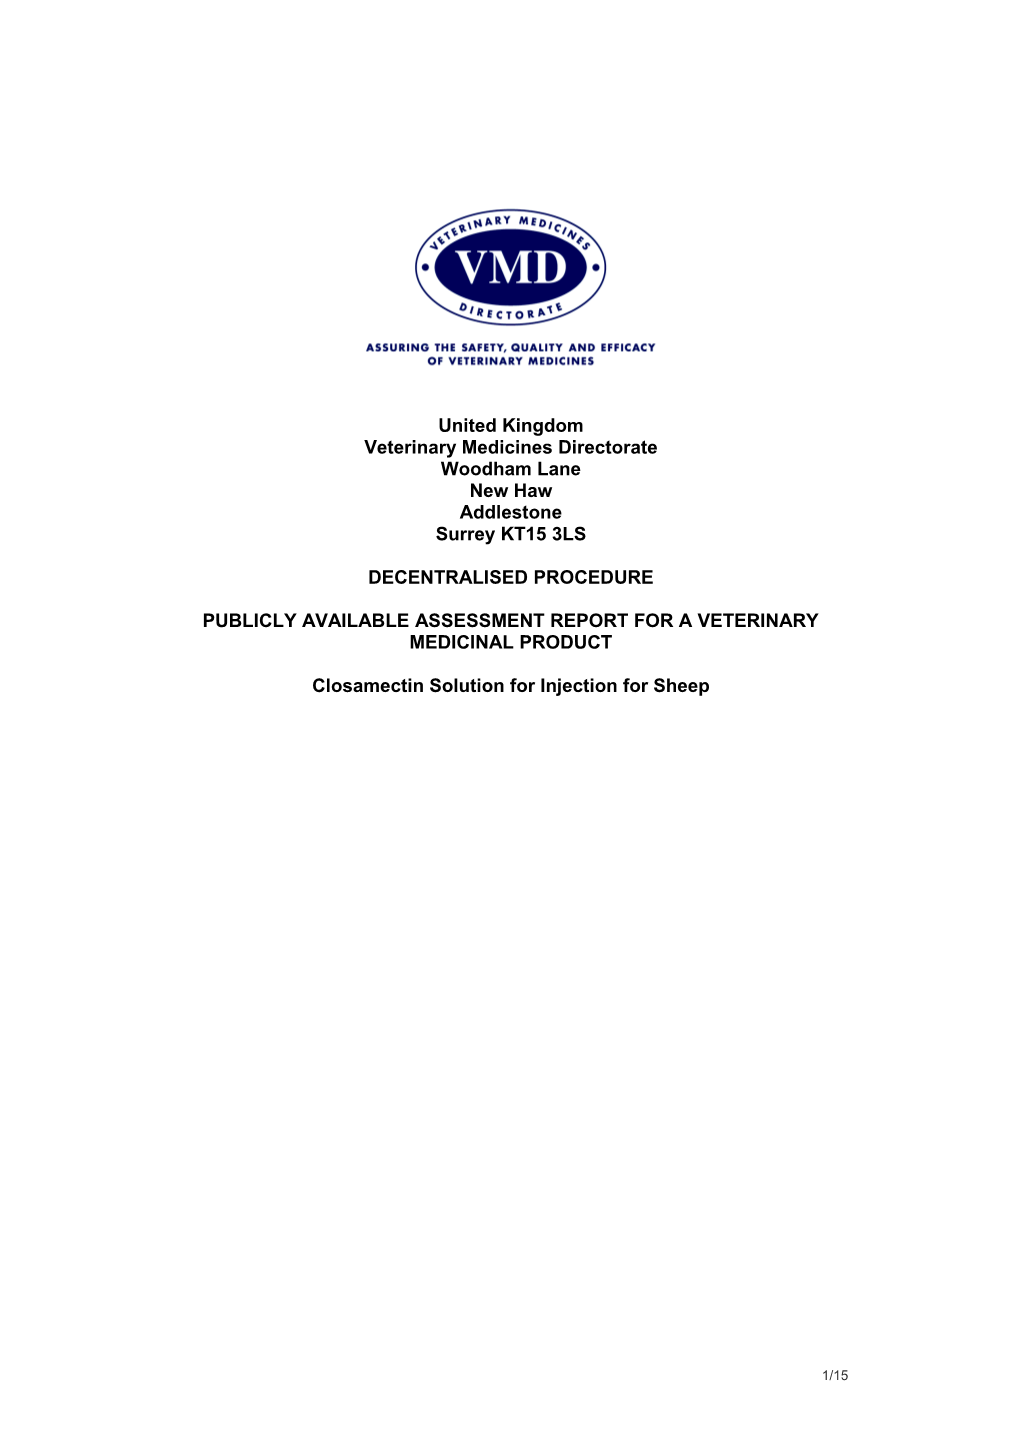 Publicly Available Assessment Report for a Veterinary Medicinal Product s11